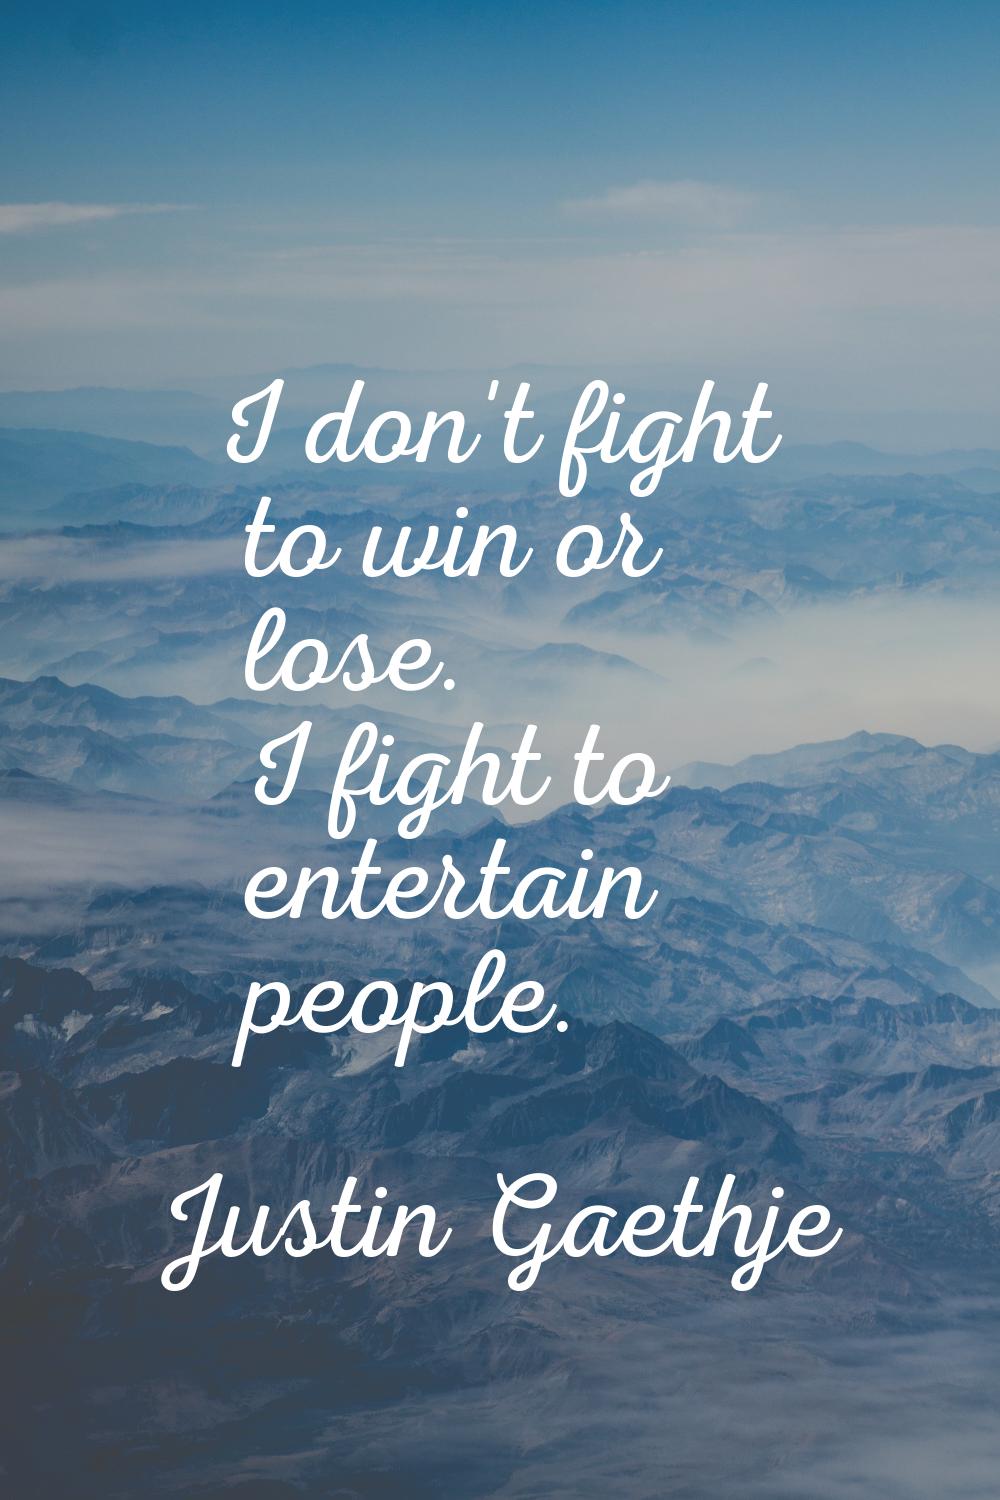 I don't fight to win or lose. I fight to entertain people.